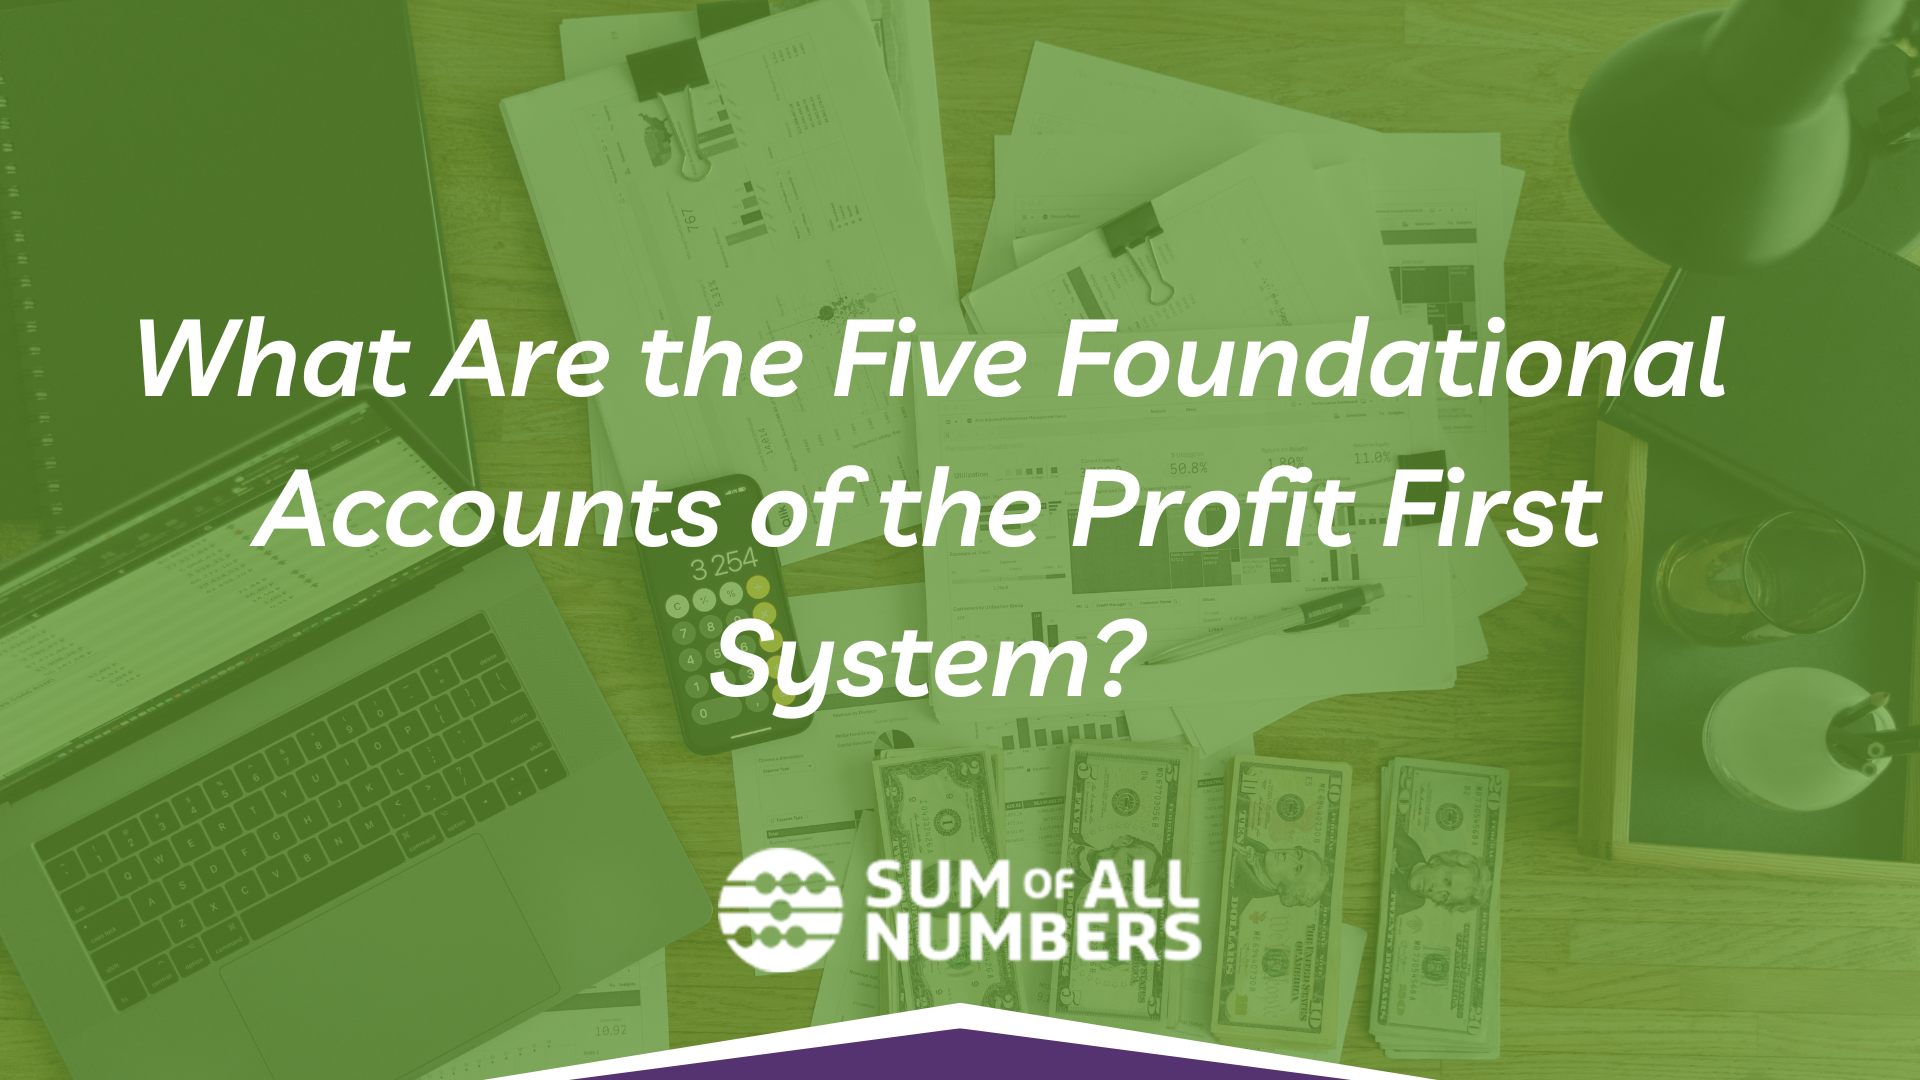 Five Foundational Accounts of the Profit First System